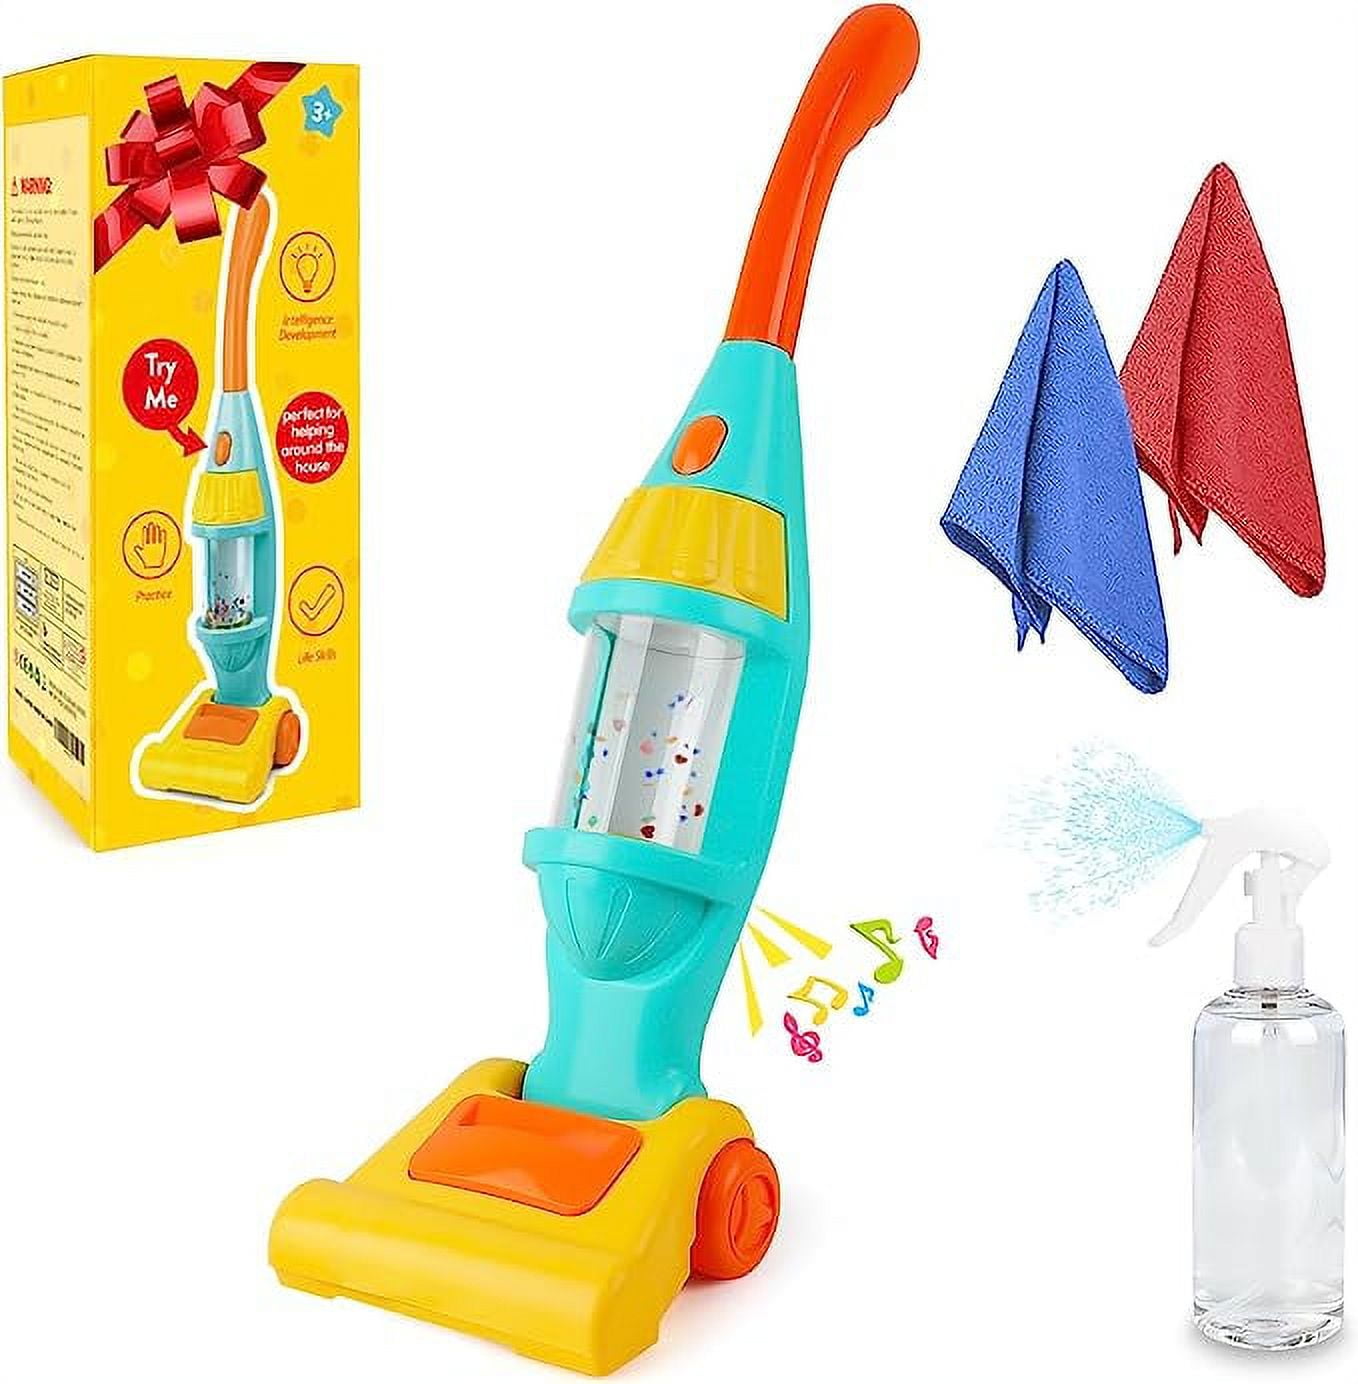 EP EXERCISE N PLAY Kids Vacuum Cleaner Toy Set, Toy Vacuum Cleaner with  Light Realistic Sounds & Whirling Stars for Boys Girls